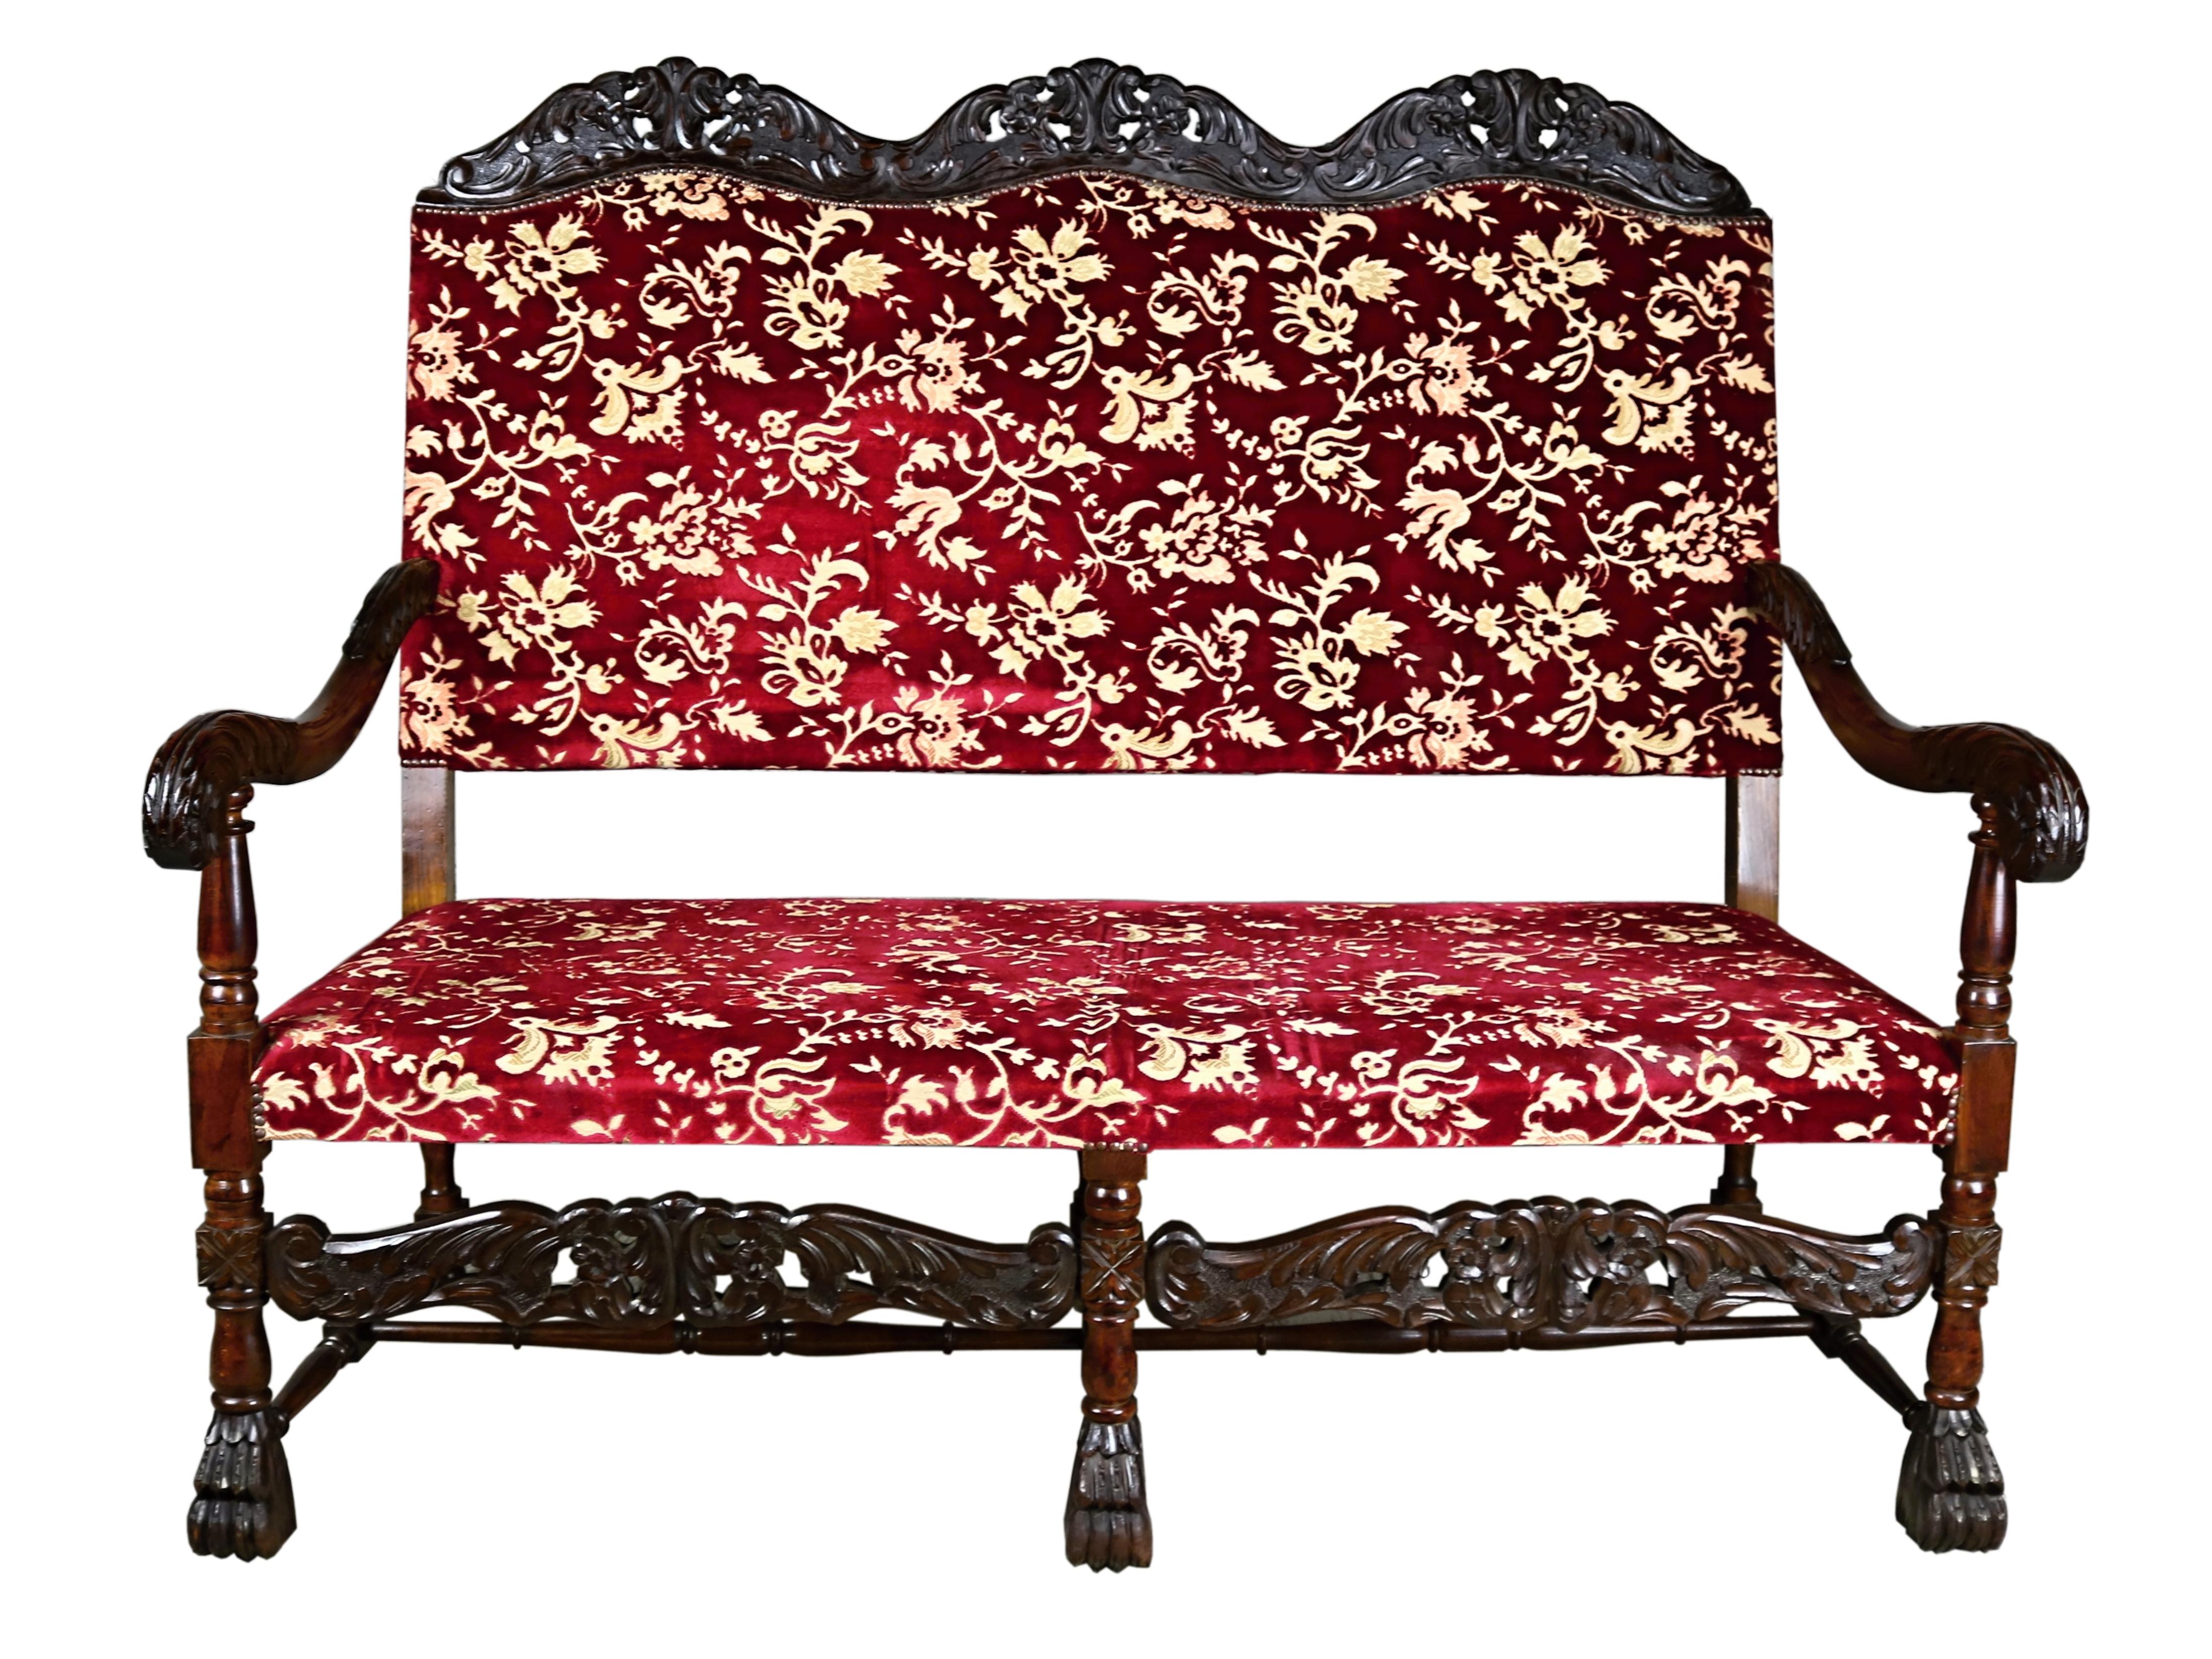 This elegant 19th century French Renaissance Revival seating set with new upholstery and hand-carved walnut legs, circa 1870s. It is a solid wooden construction it features a highly decorative character with a seat upholstered in red leather which